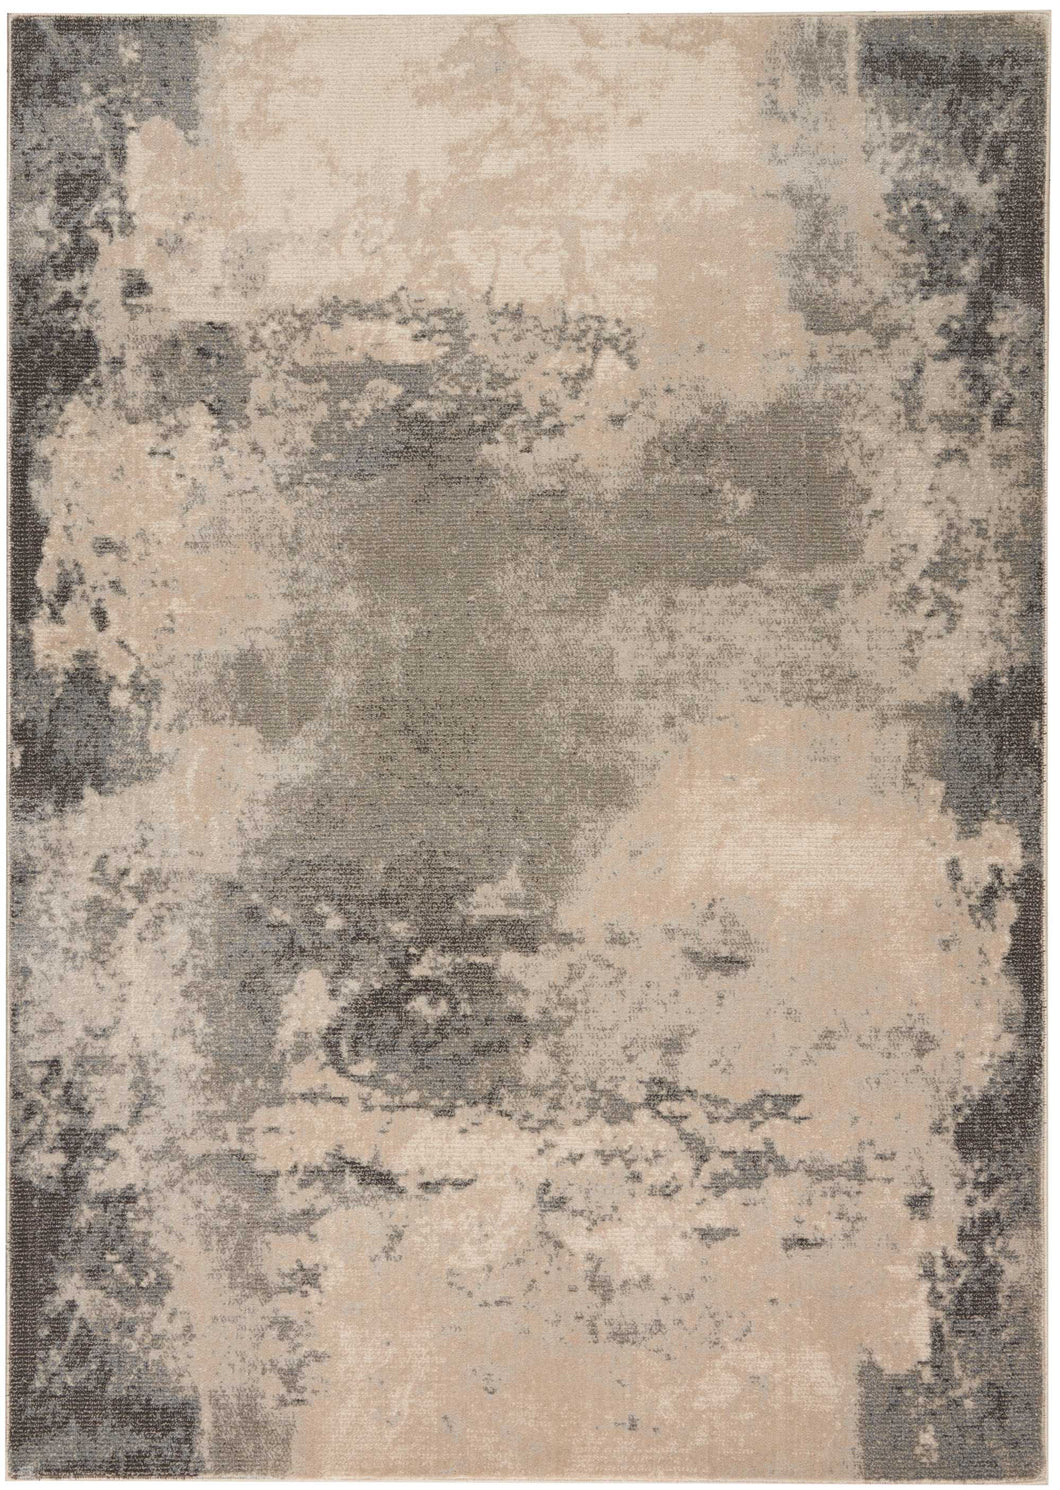 Nourison Maxell MAE13 Grey and White 5'x7' Area Rug MAE13 Ivory/Grey